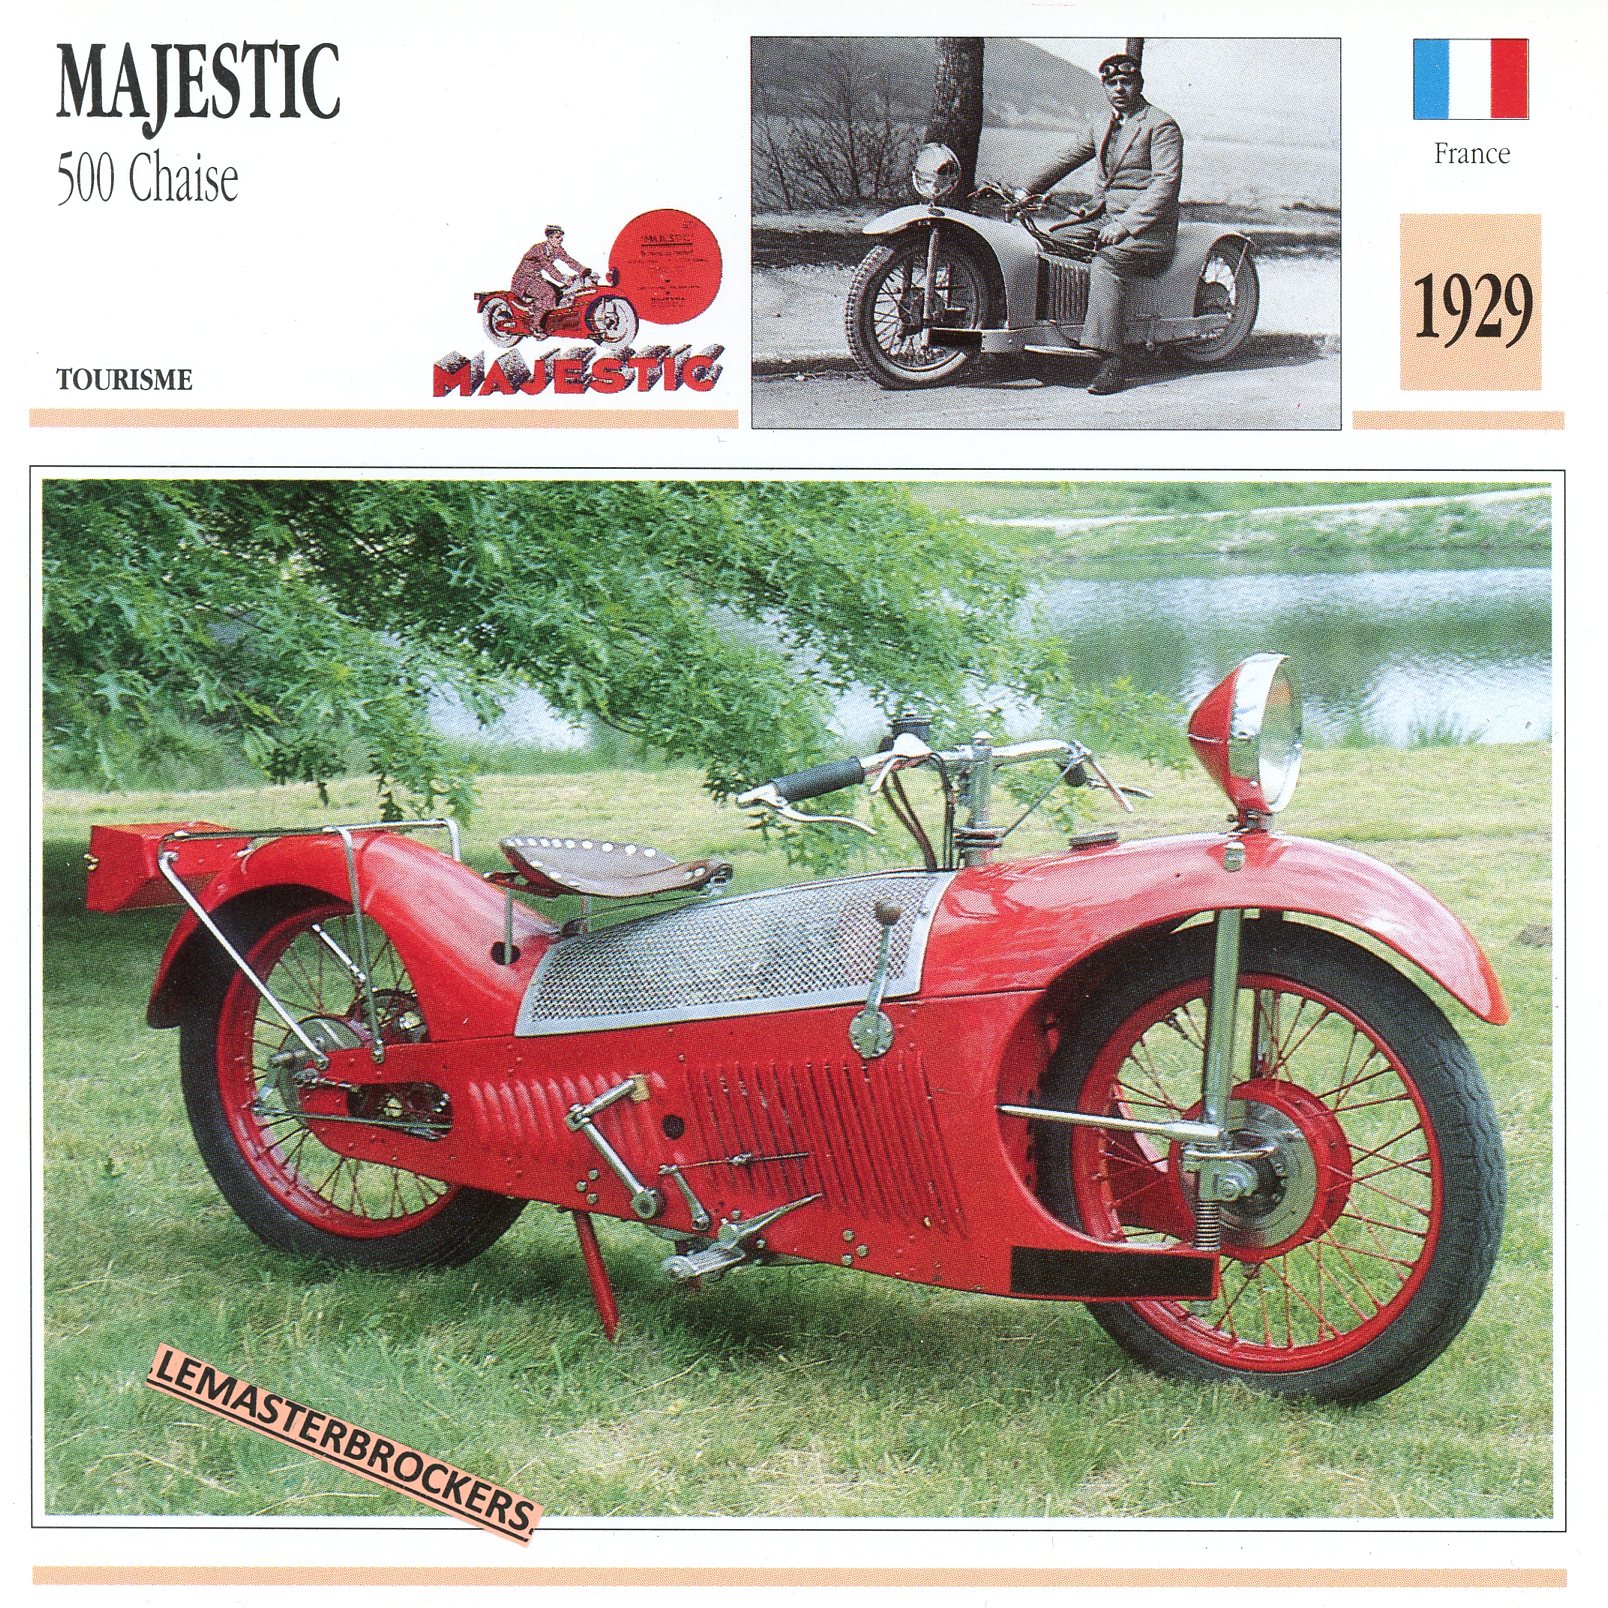 FICHE-MOTO-MAJECTIC-CHAISE-1929-LEMASTERBROCKERS-CARD-MOTORCYCLE